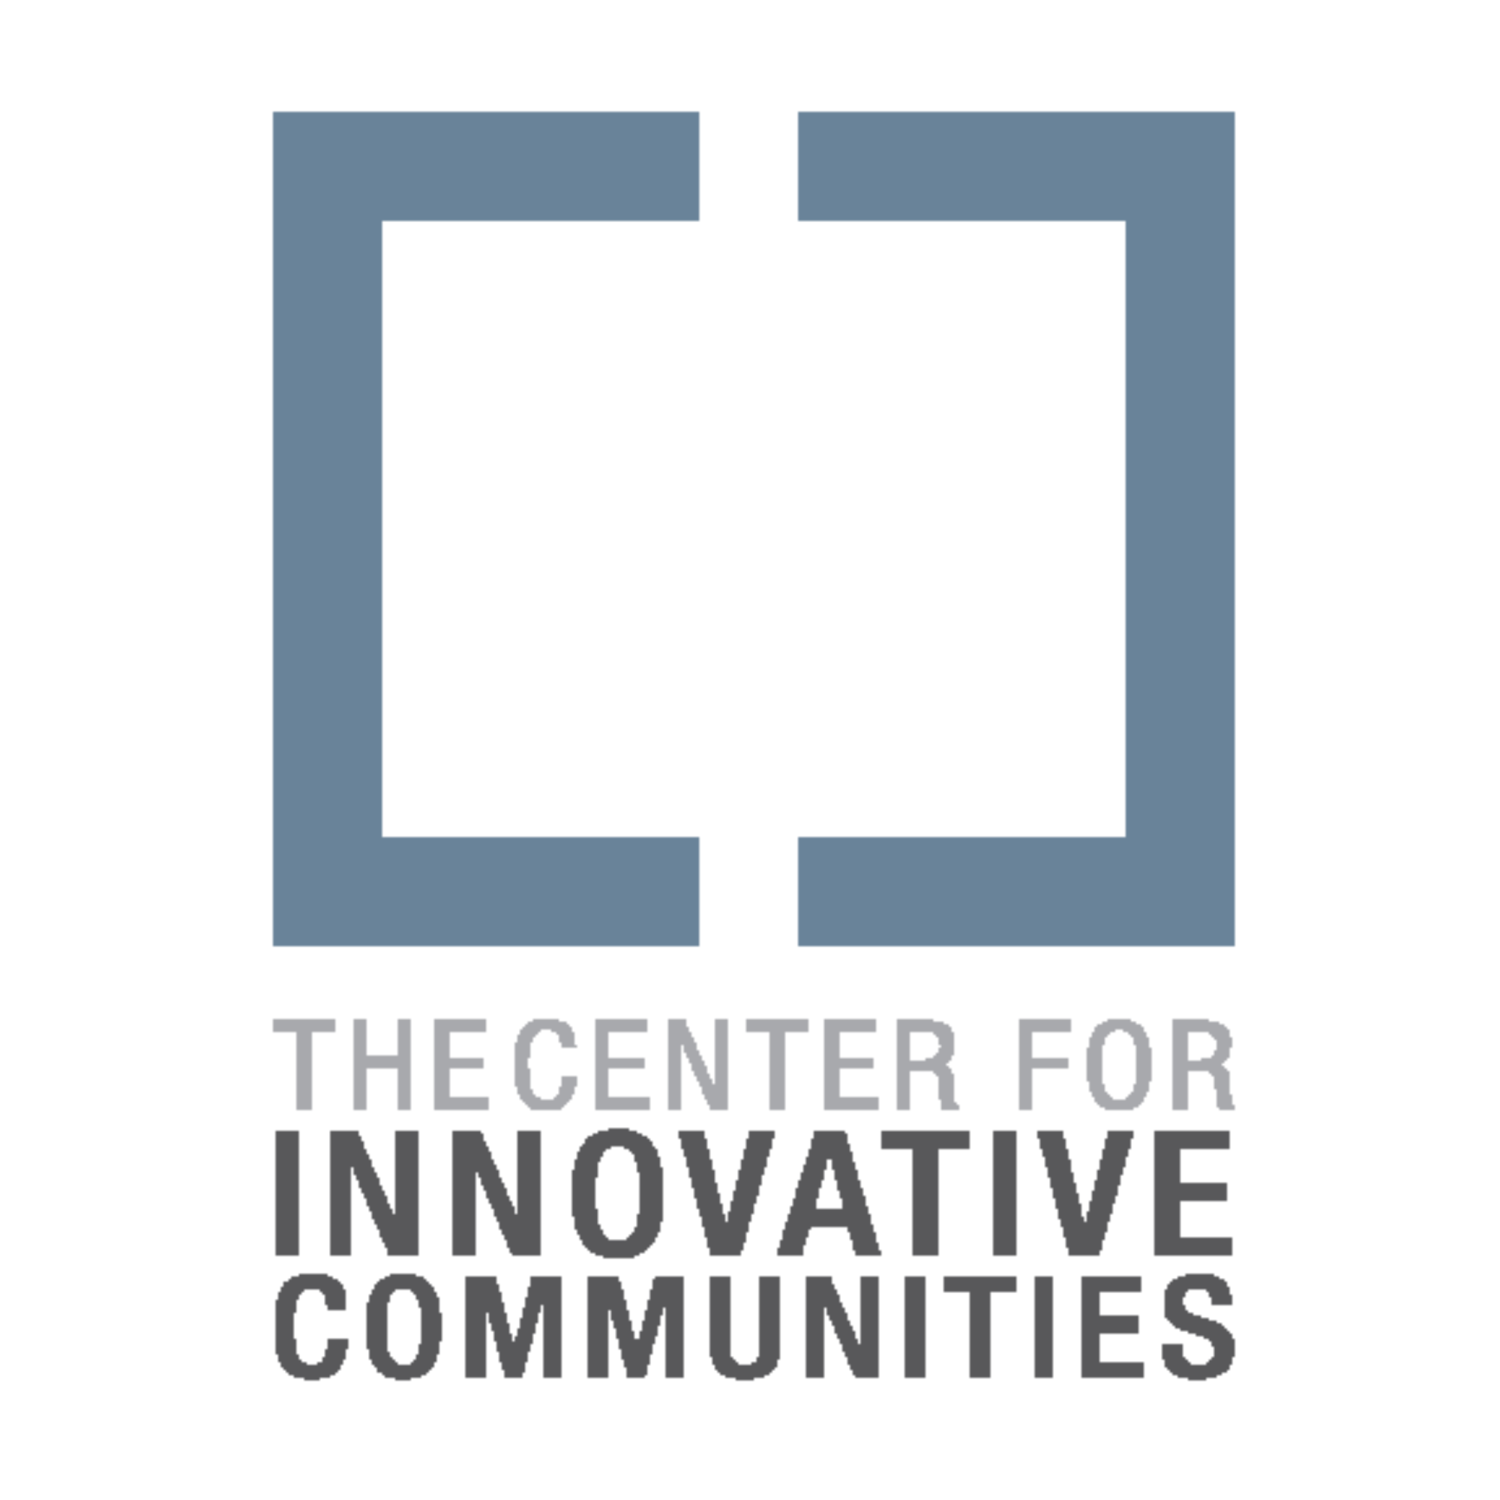 The Center for Innovative Communities